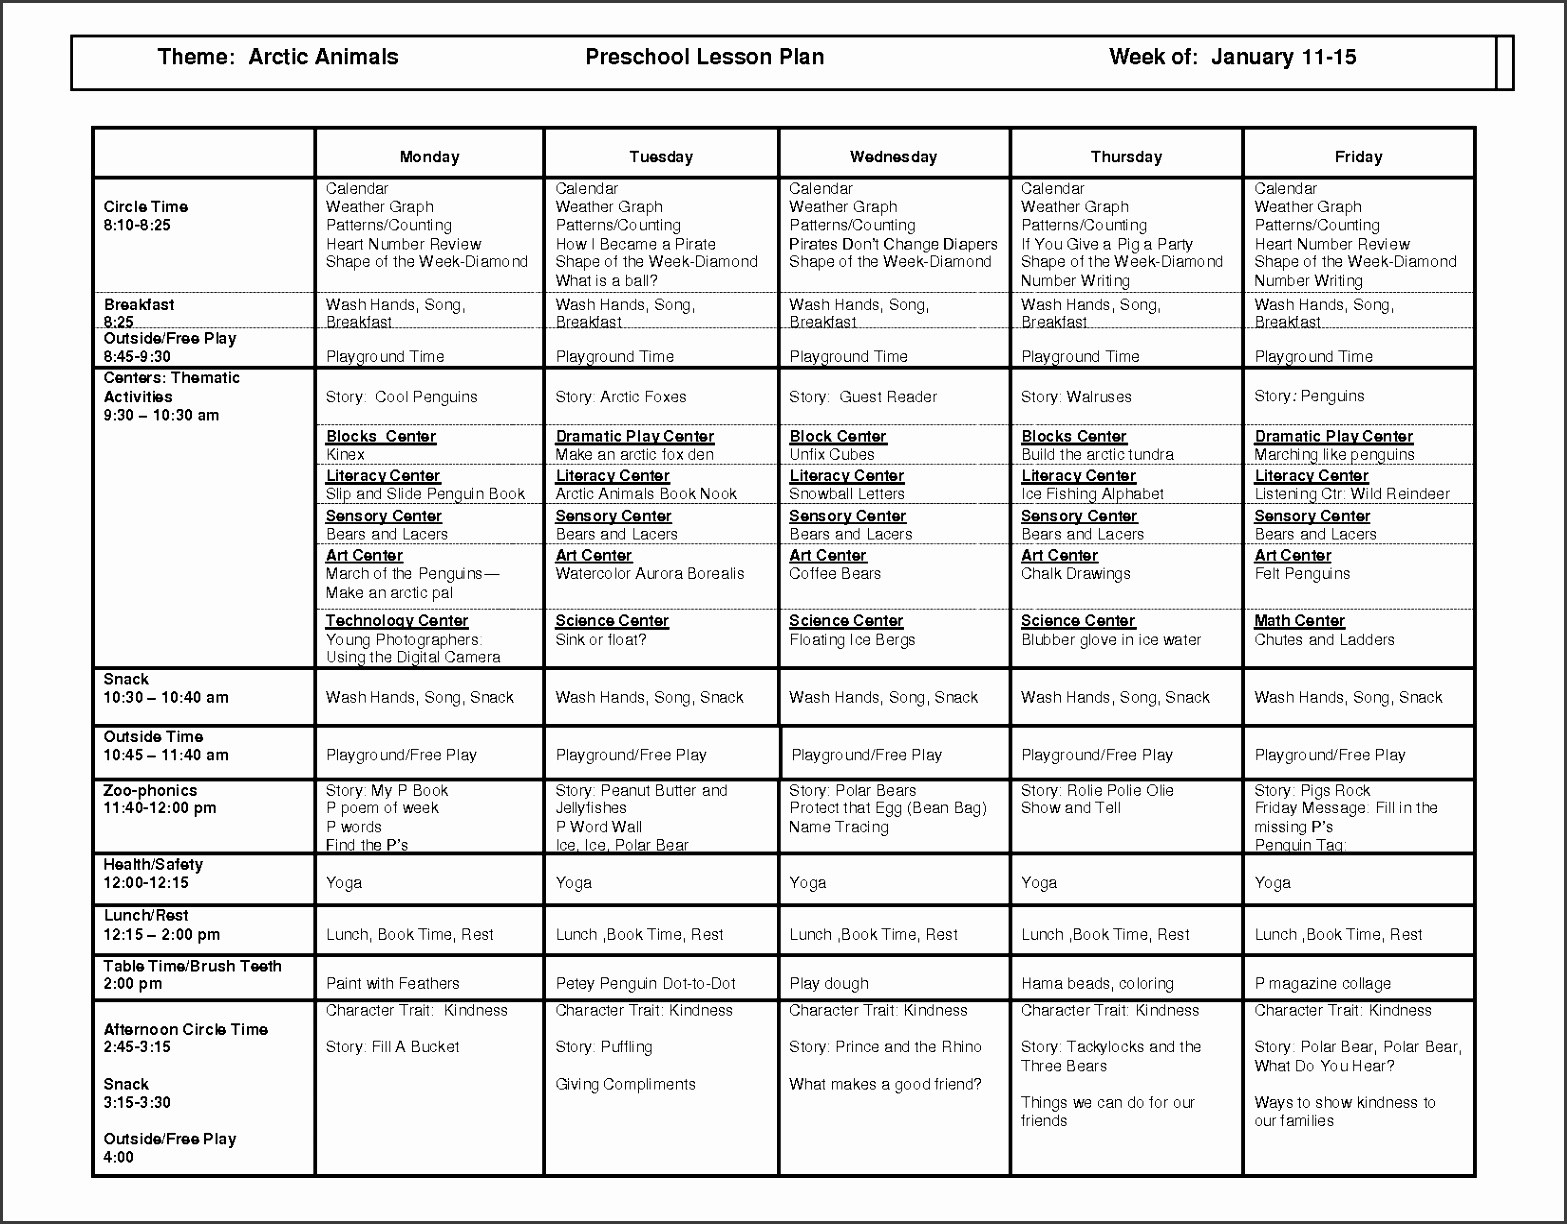 Preschool Weekly Lesson Plan 7 Mon Core Weekly Lesson Plan Template